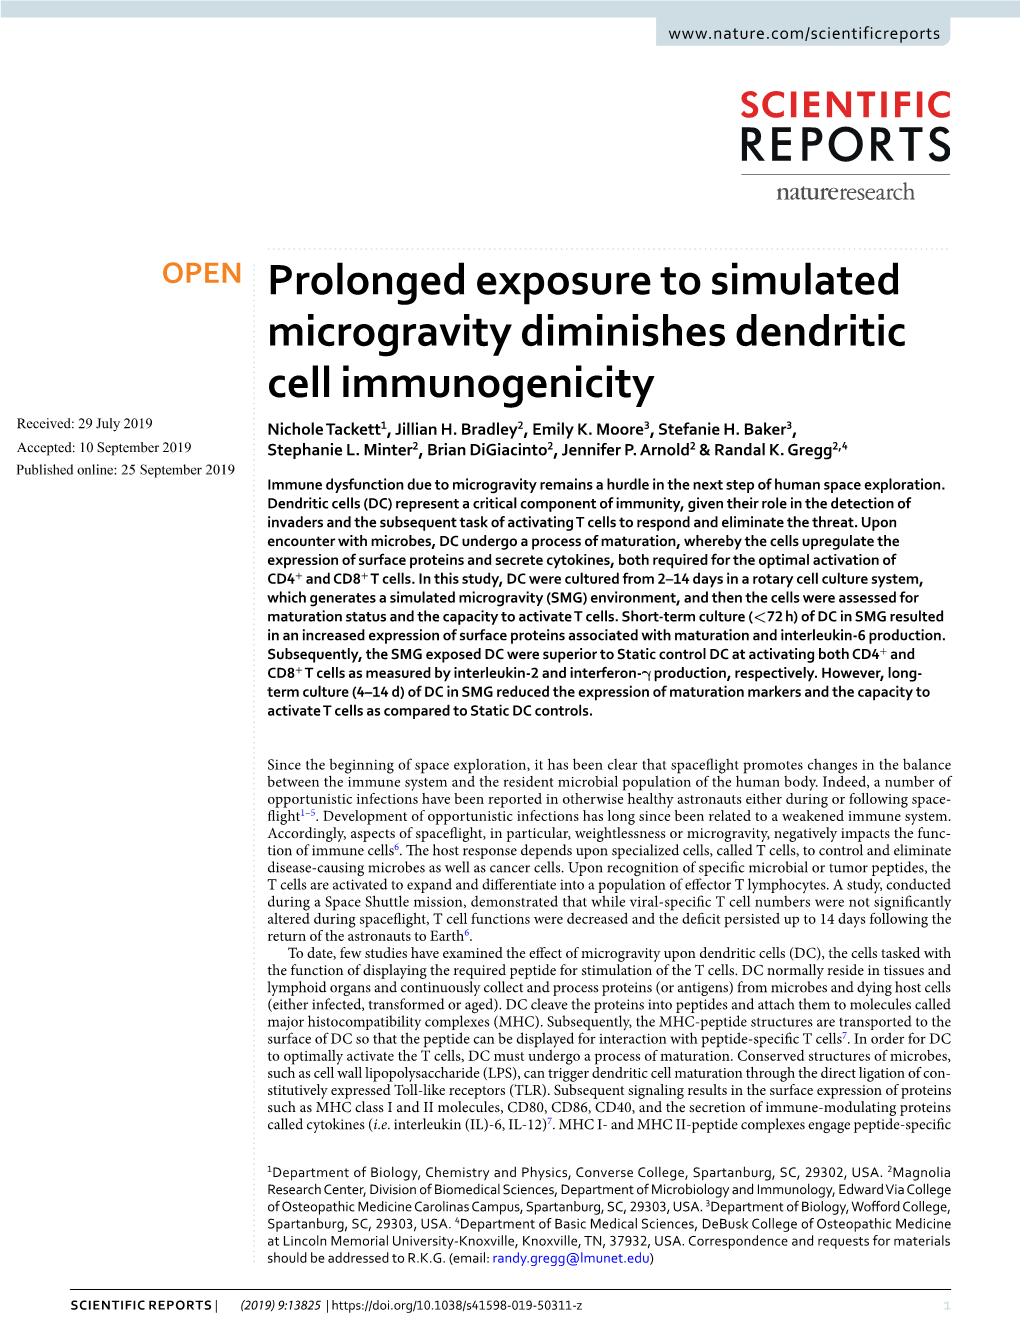 Prolonged Exposure to Simulated Microgravity Diminishes Dendritic Cell Immunogenicity Received: 29 July 2019 Nichole Tackett1, Jillian H